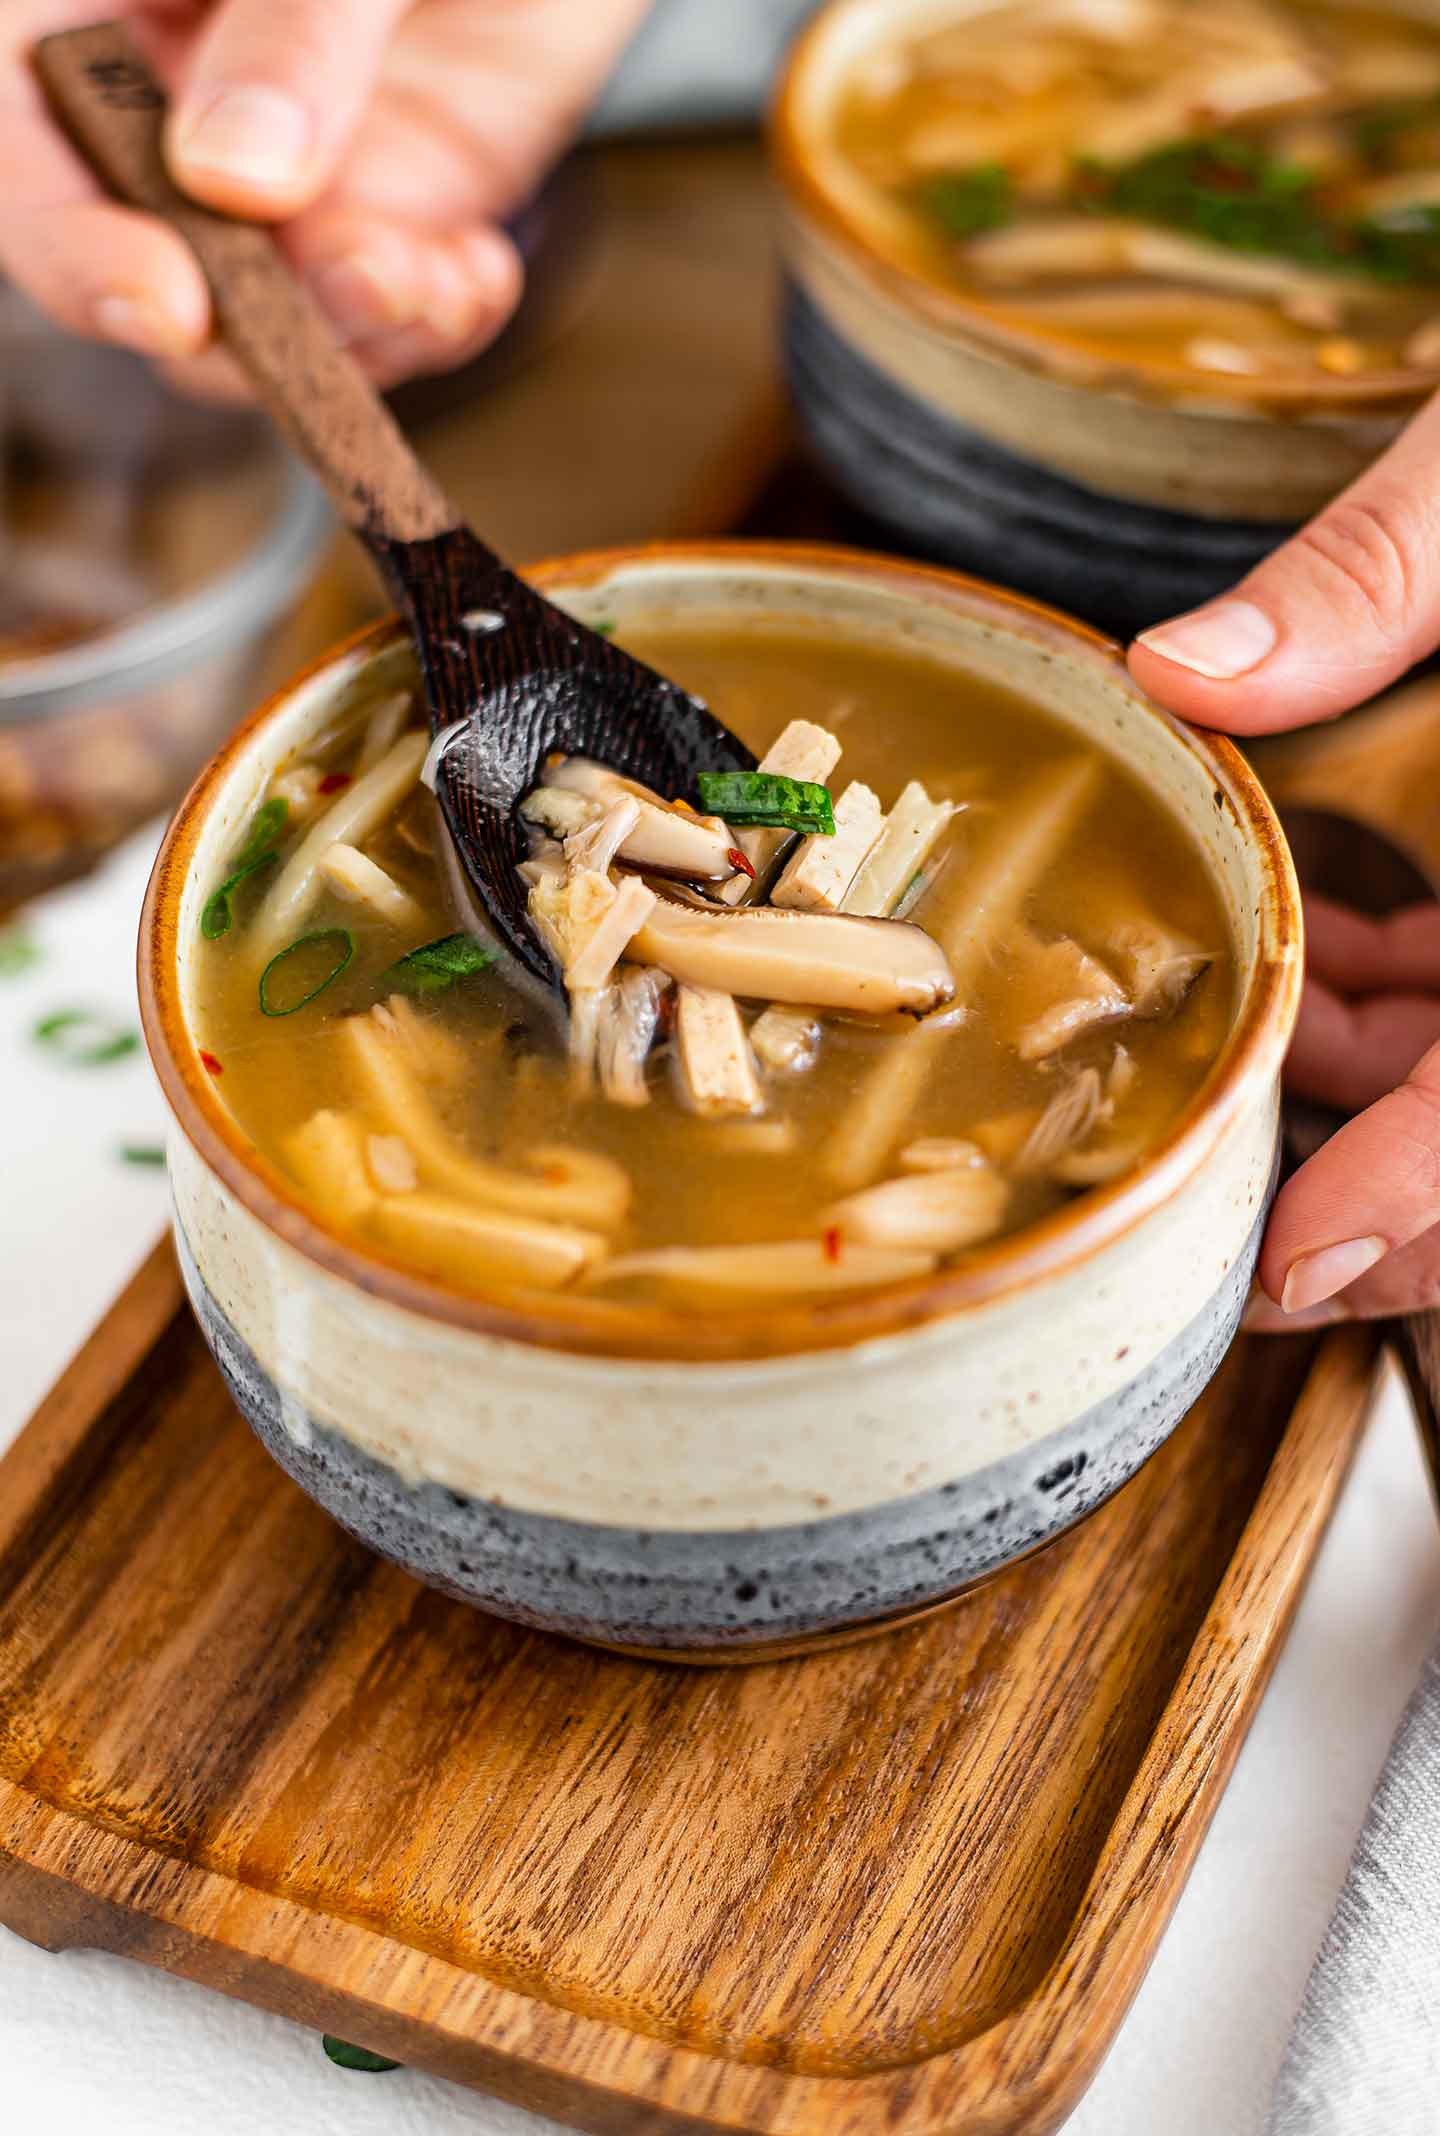 Side view of a spoon dipping into a bowl of hot and sour soup. Thinly sliced tofu, bamboo shoots, and mushrooms swim in the thick and glossy broth.